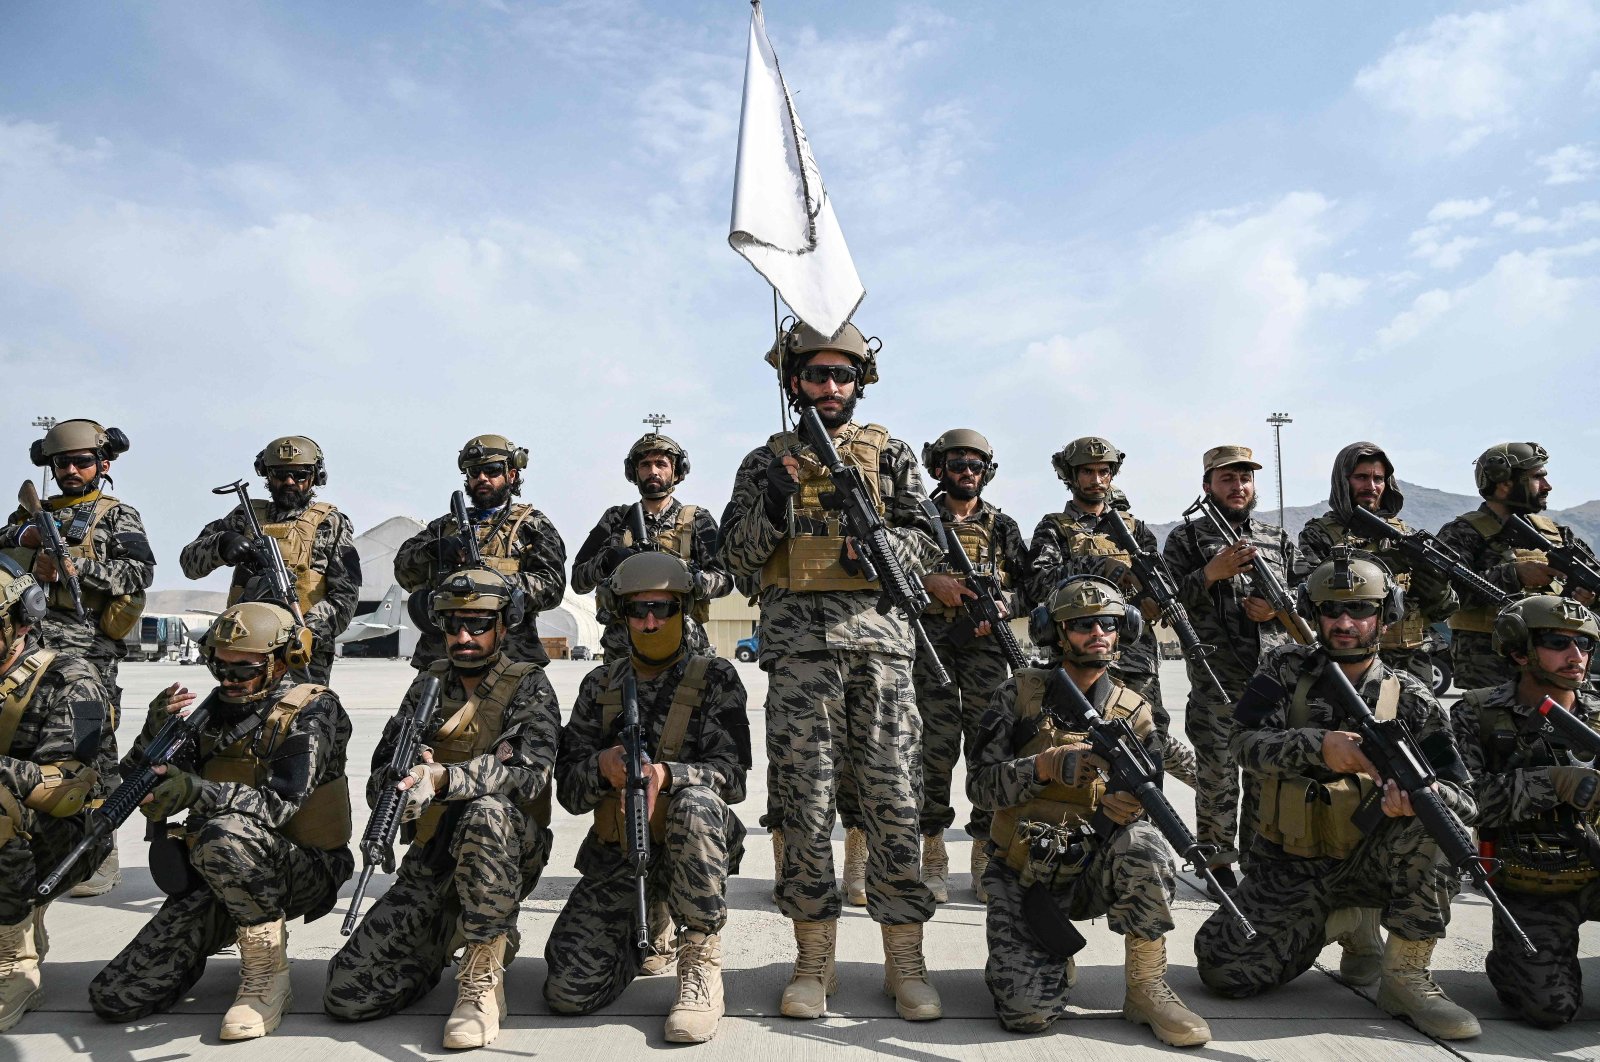 Taliban Badri special force fighters take a position at the airport in Kabul on Aug. 31, 2021, after the U.S. pulled all its troops out of the country to end a brutal 20-year war. (AFP Photo)